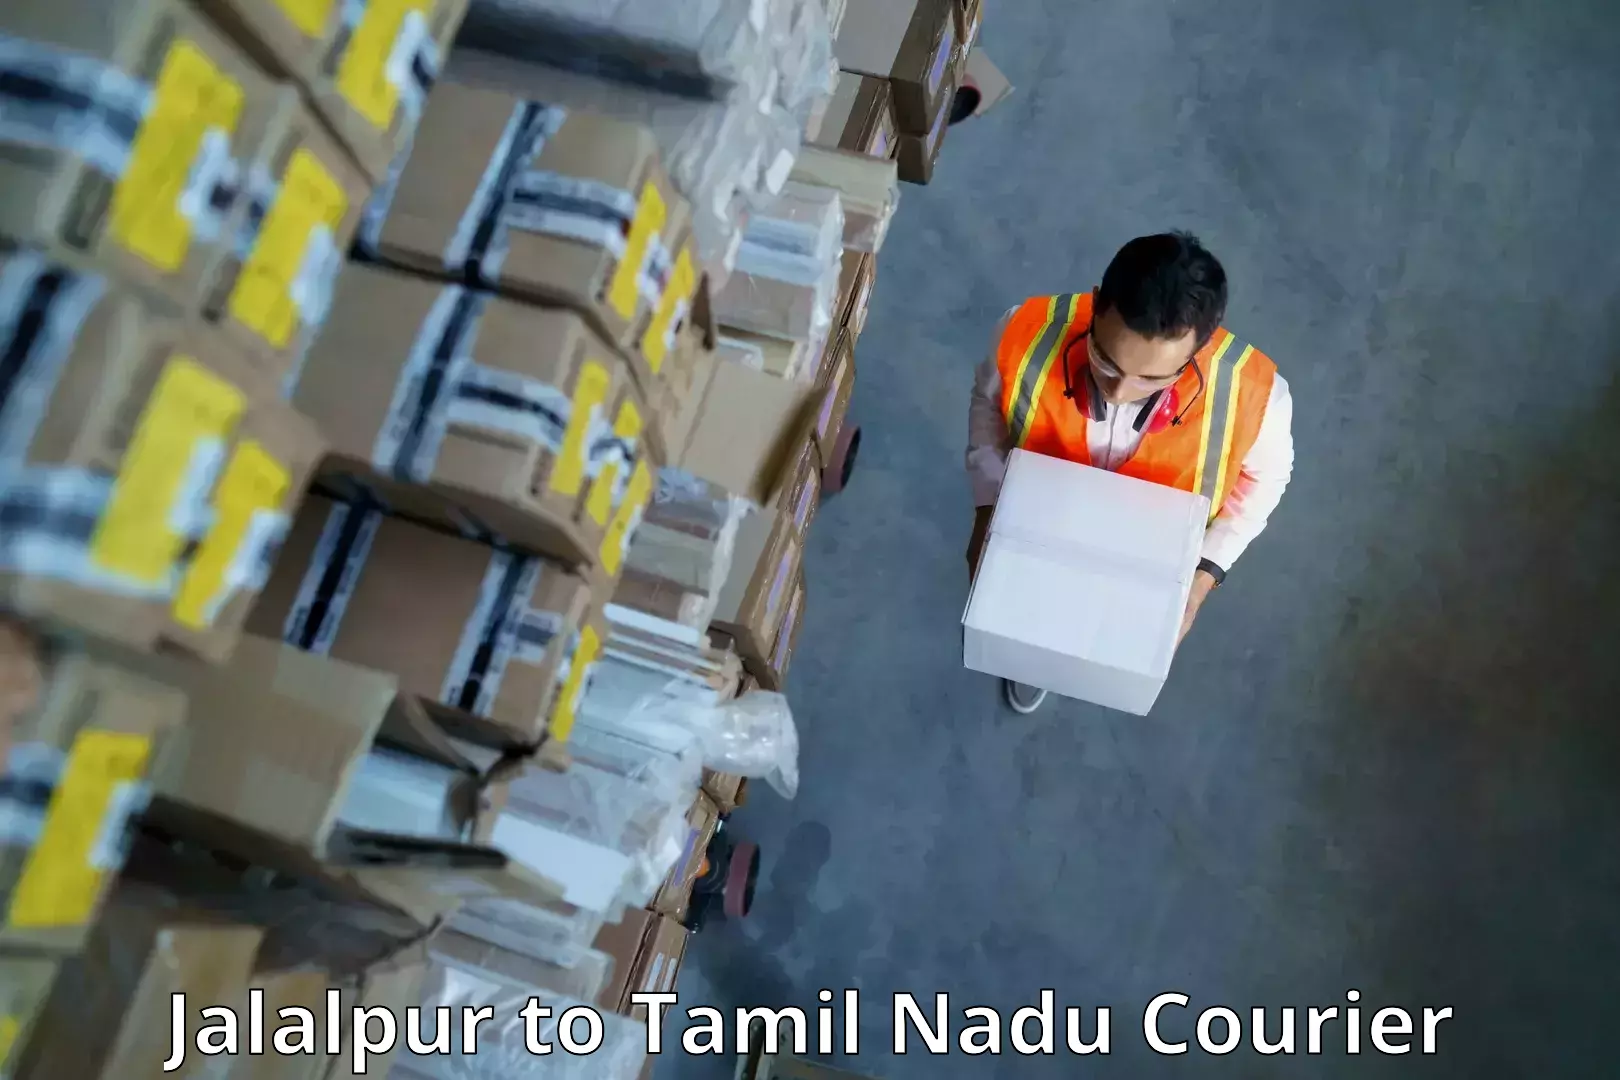 24-hour courier service in Jalalpur to Tuticorin Port